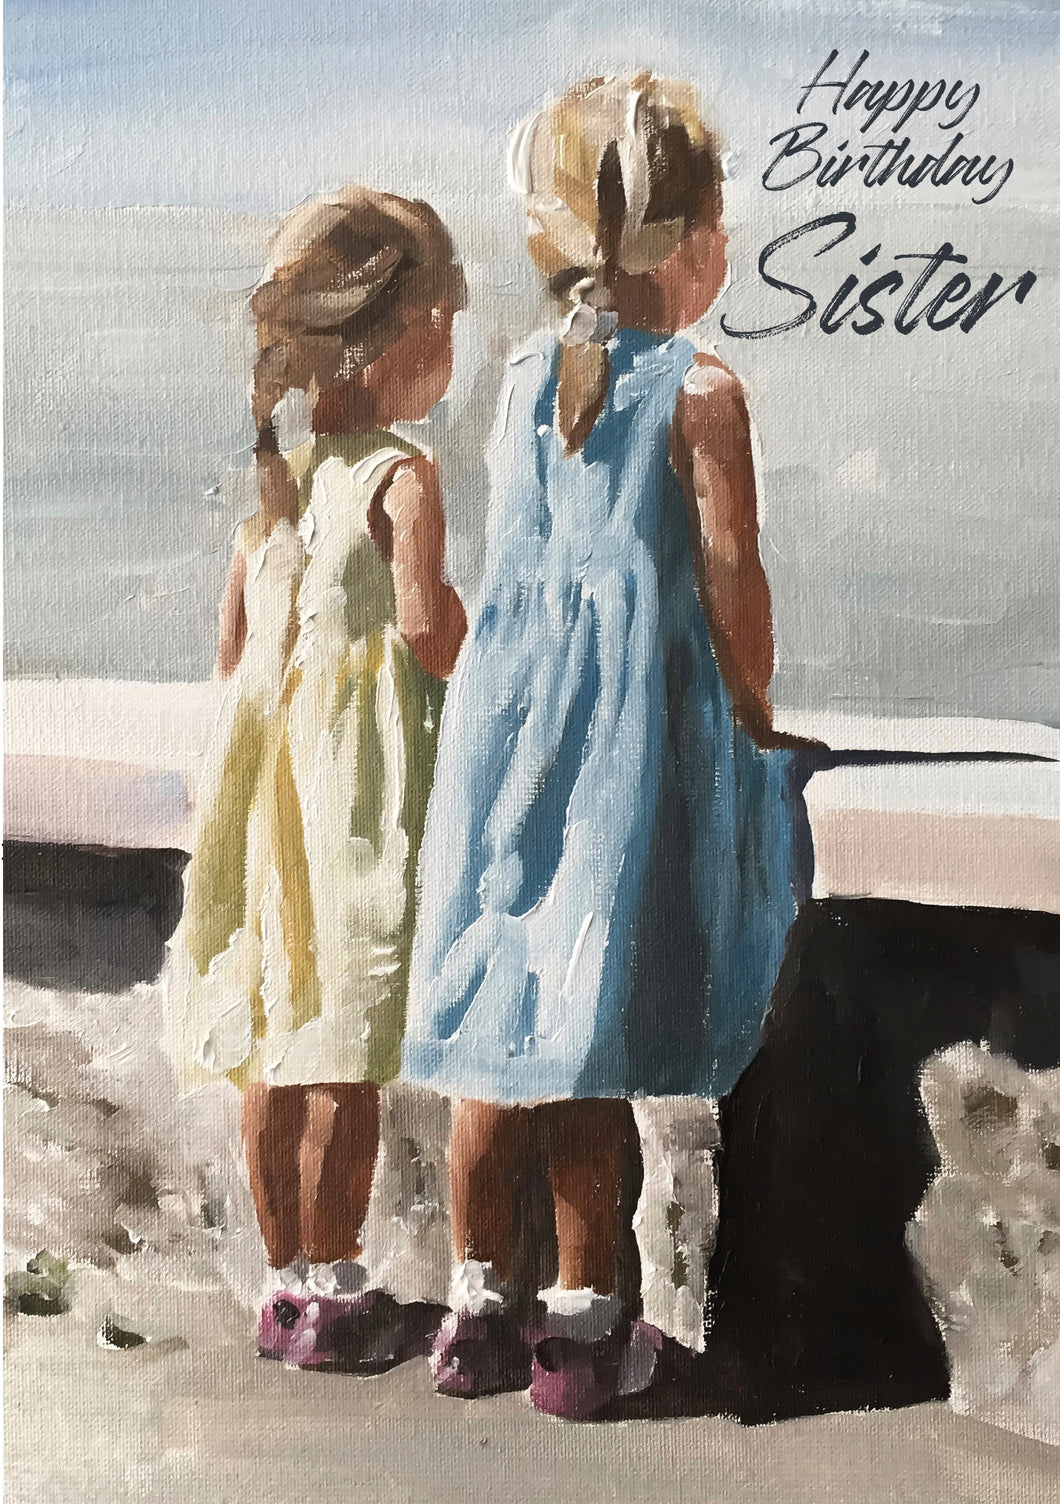 Sister Birthday Card for Special Sister from a Big Sister or Little Sister  A5